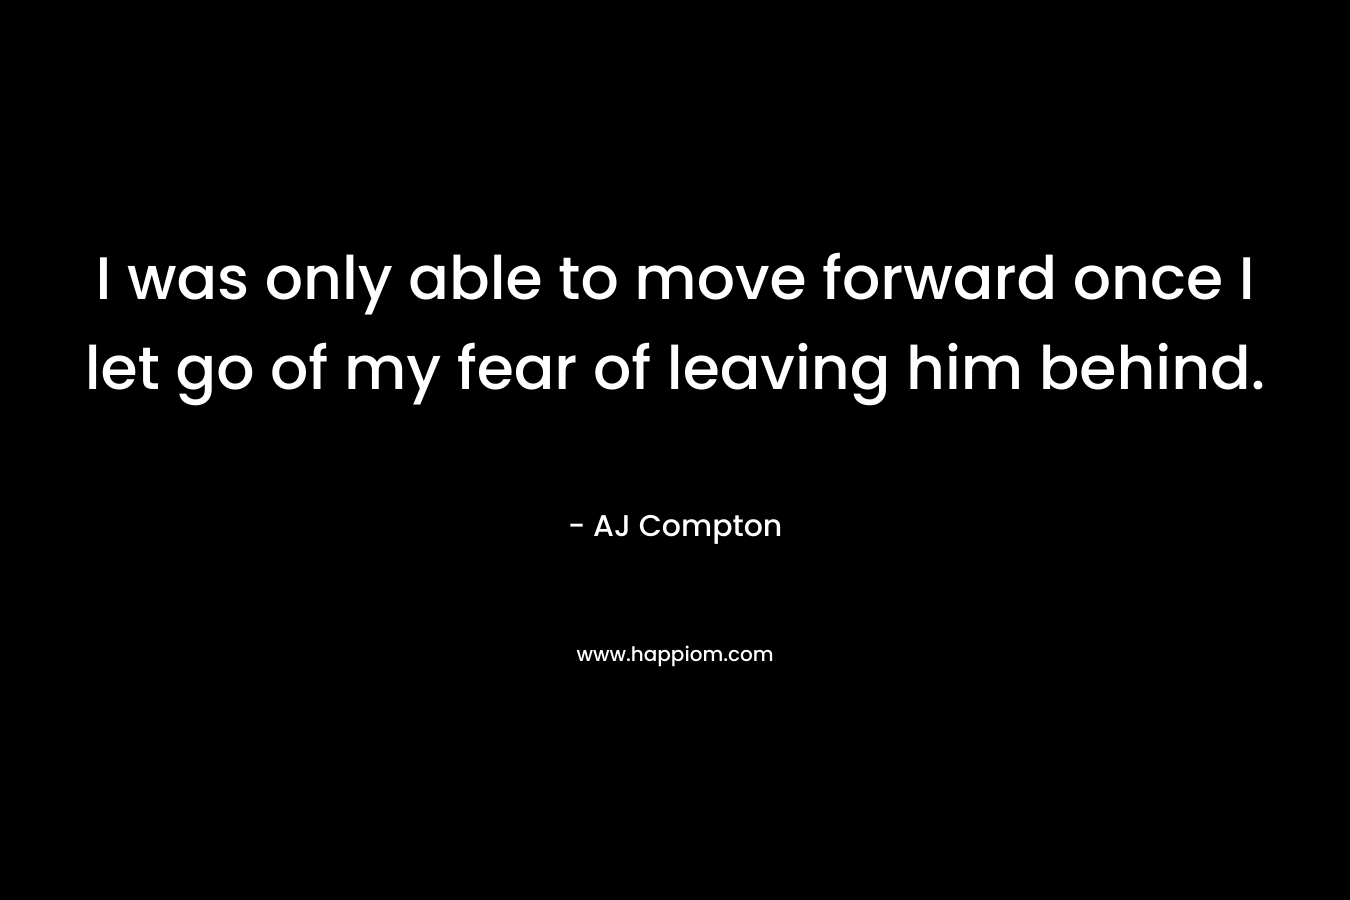 I was only able to move forward once I let go of my fear of leaving him behind.